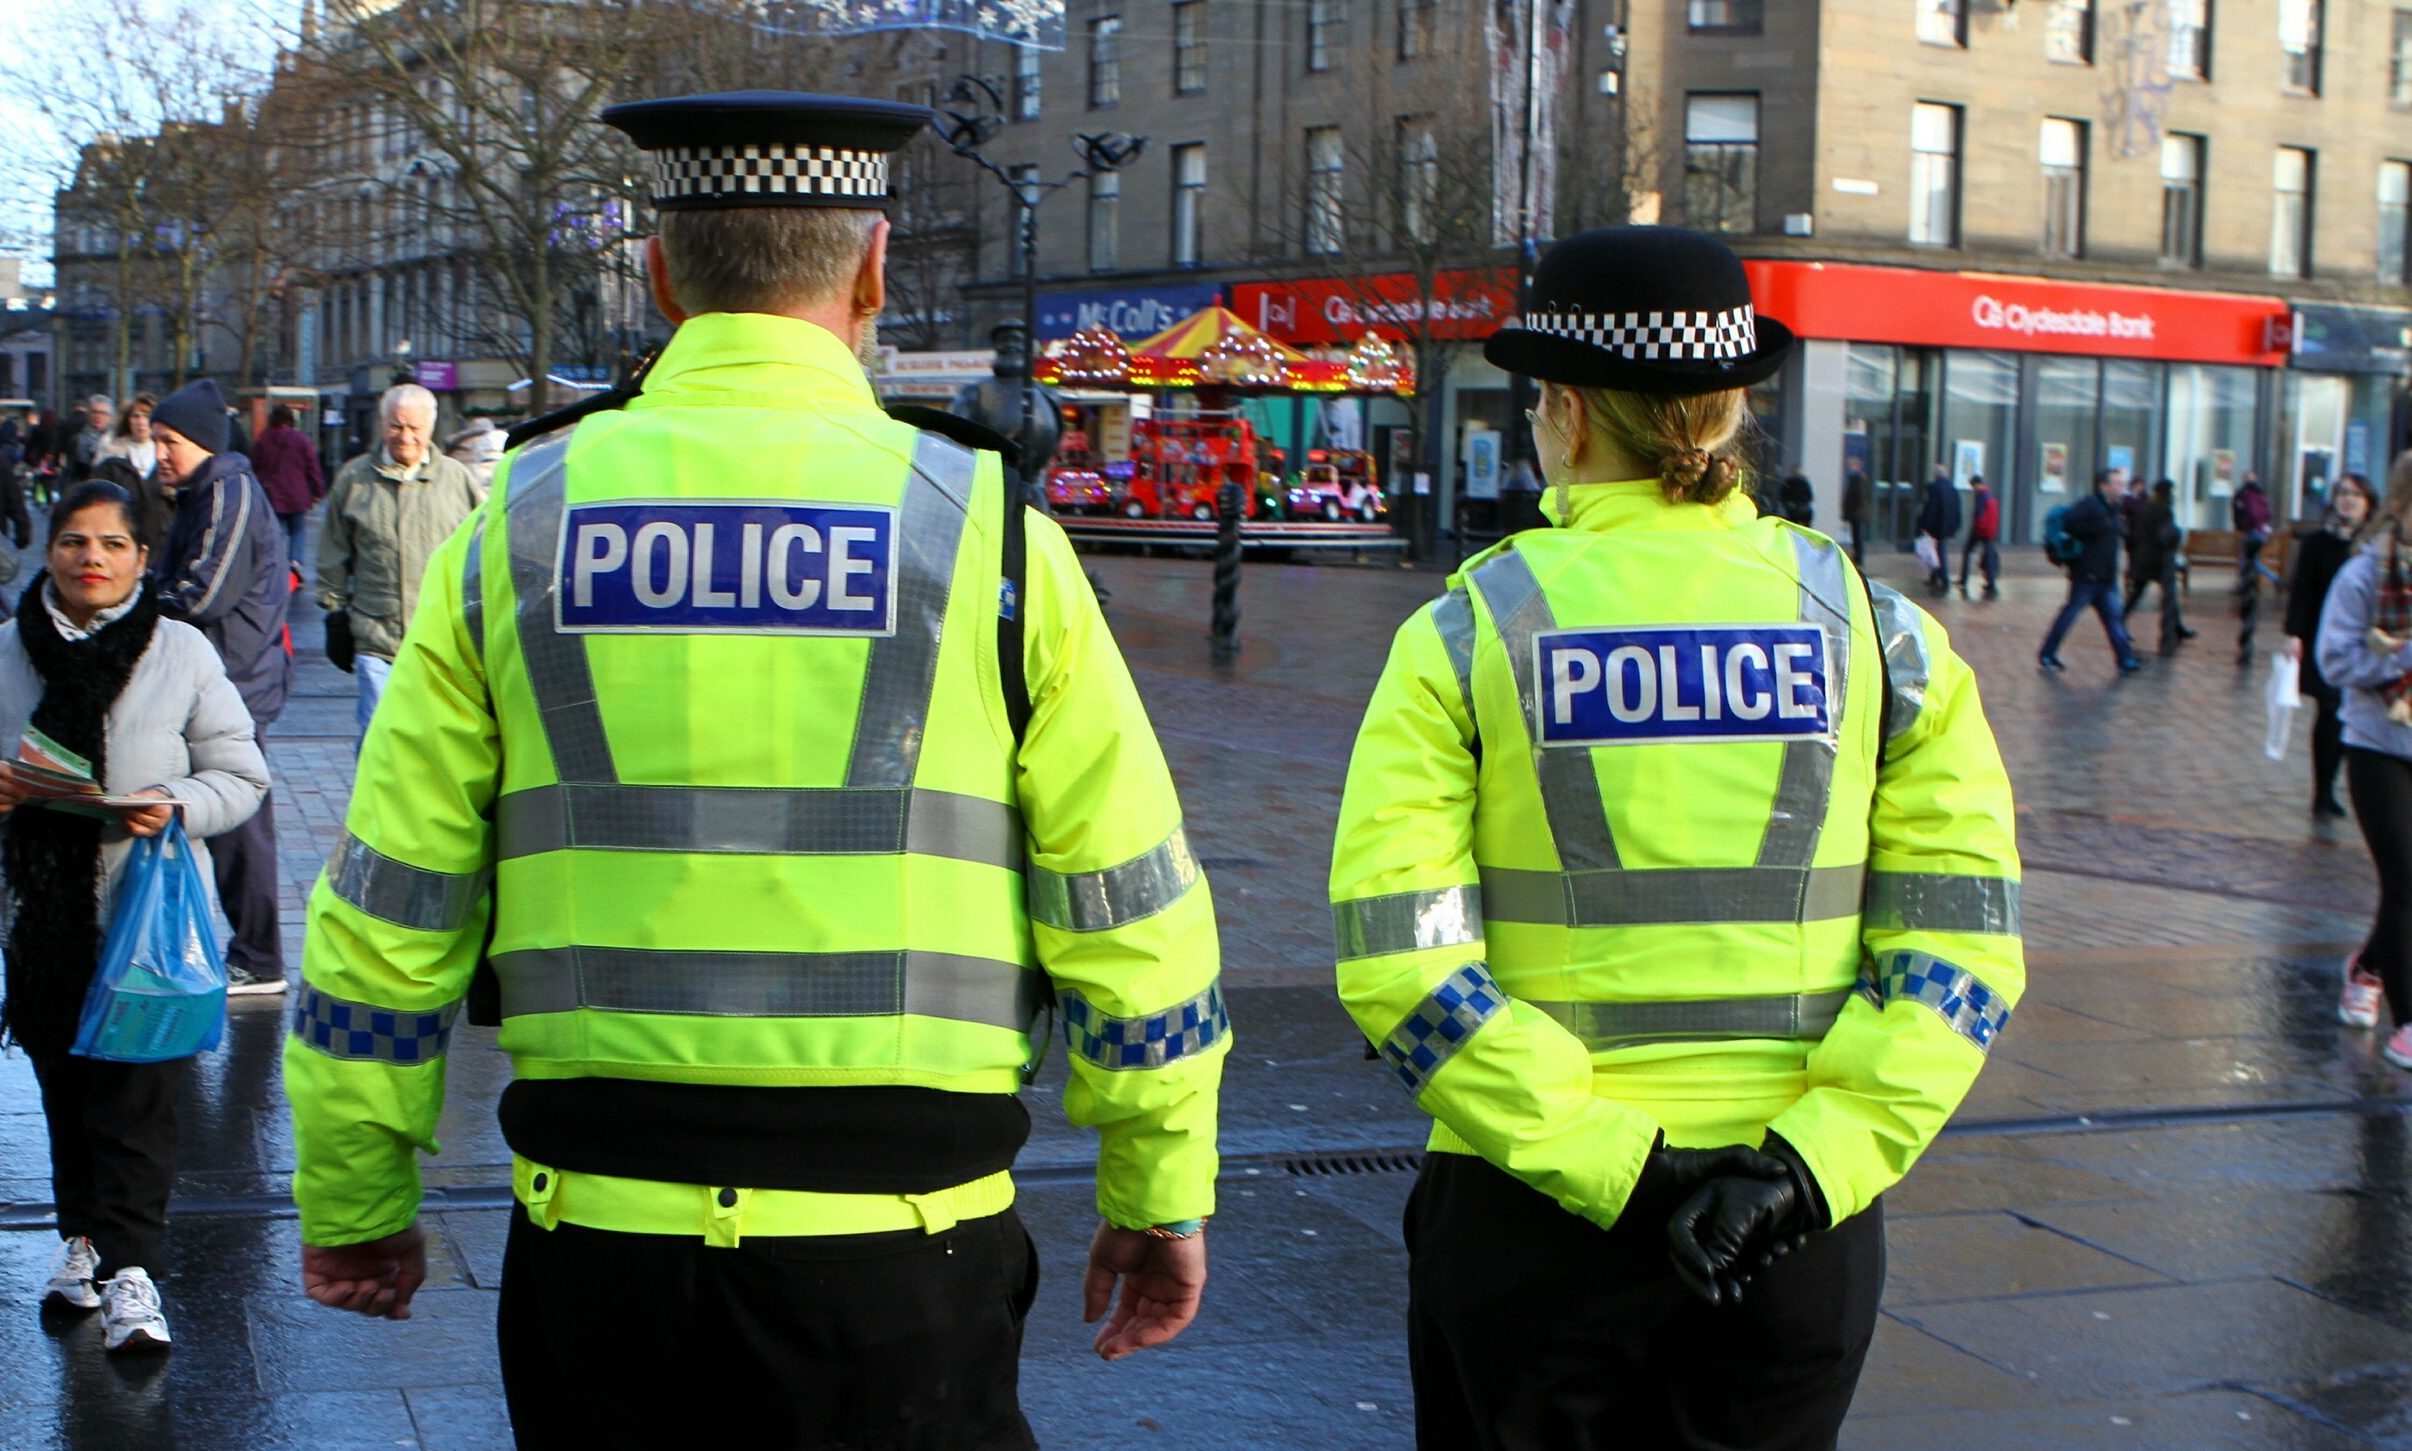 Police patrol in Dundee city centre.